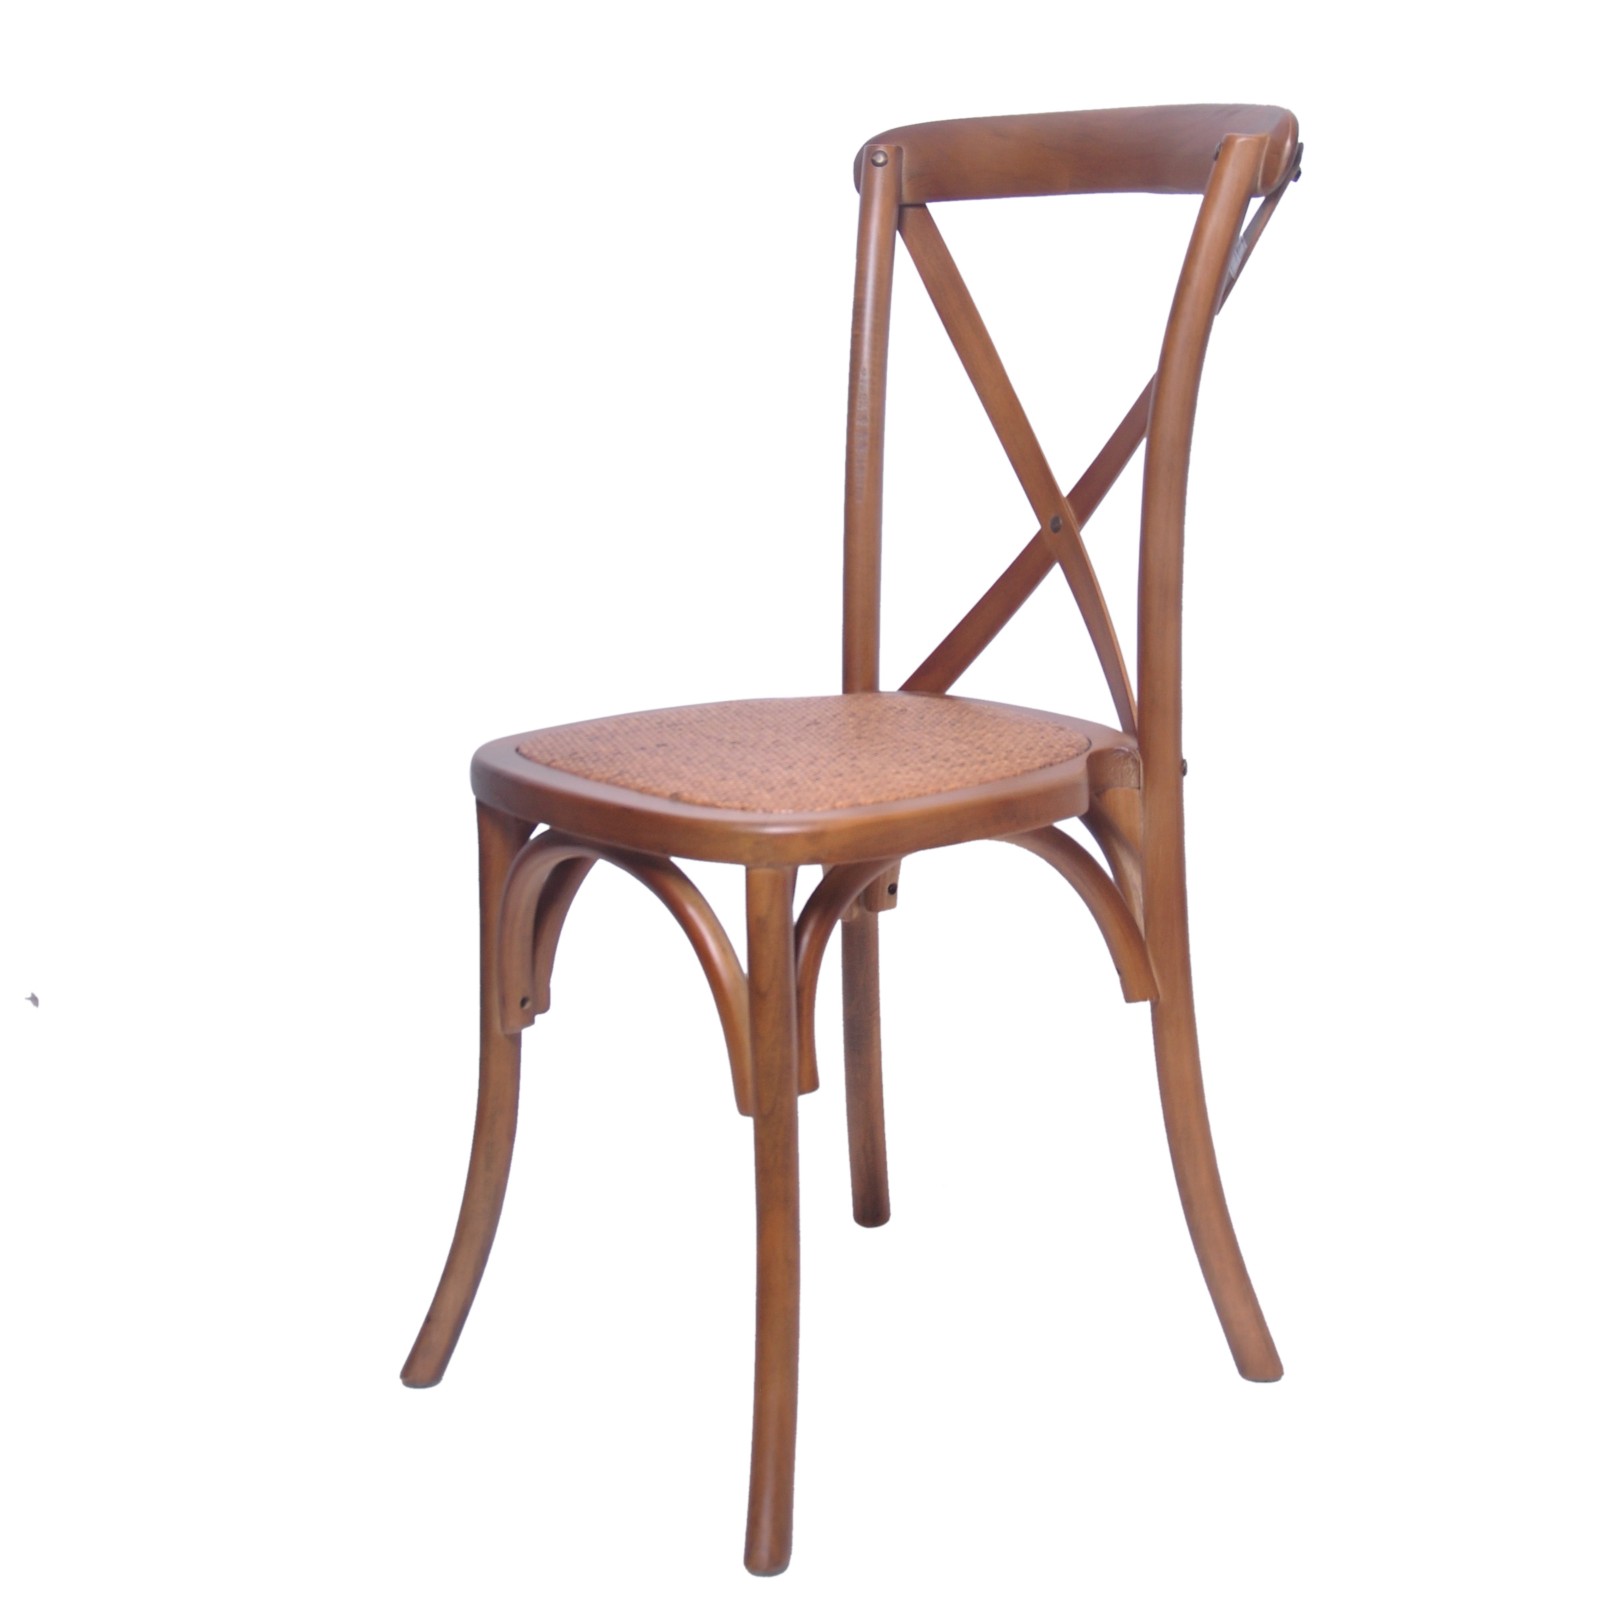 Lucca x-back wood chair supplier.jpg